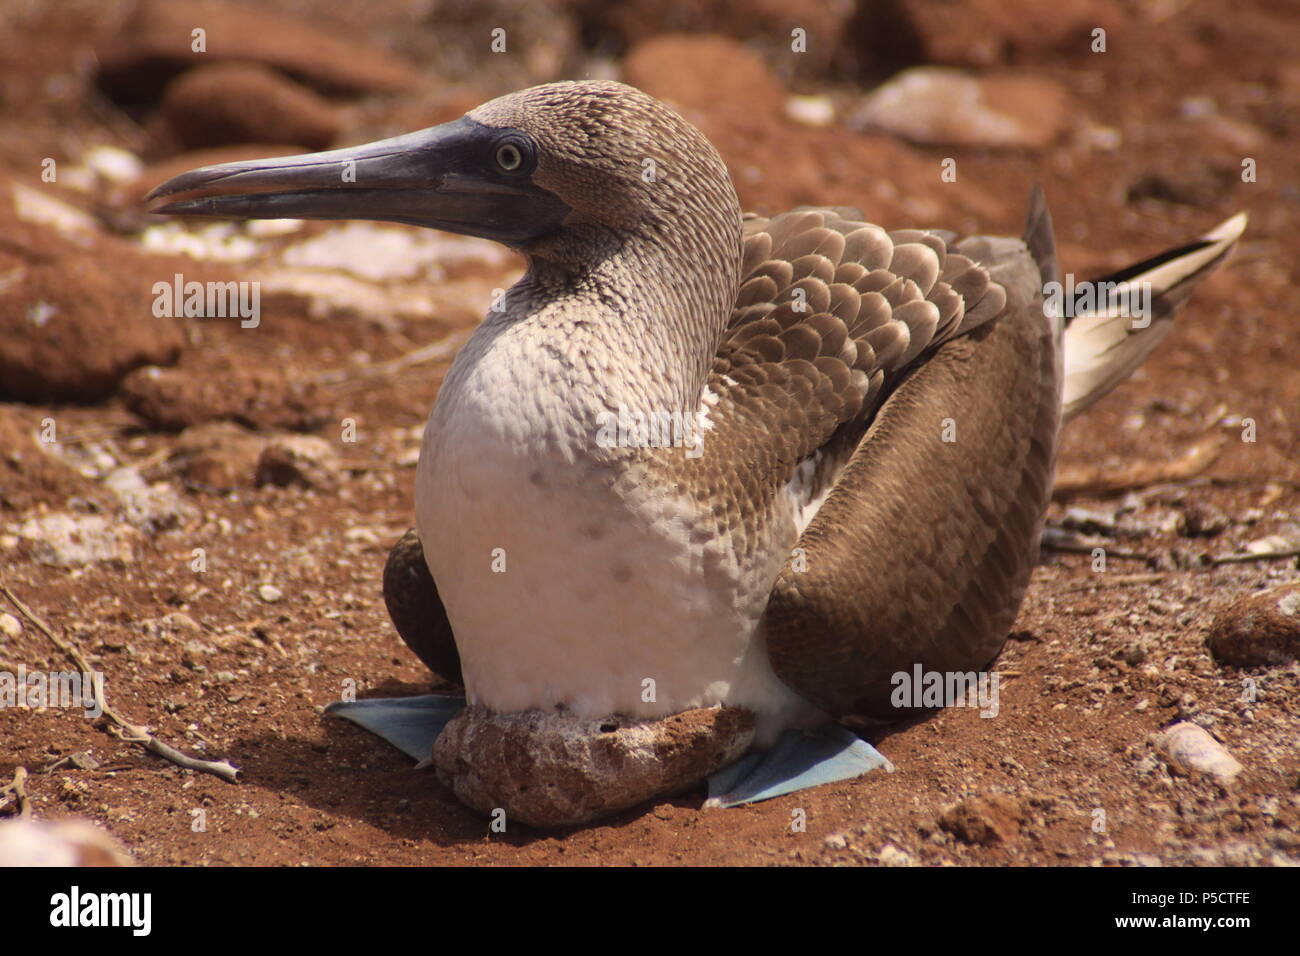 Blue-footed booby nesting on the ground in Galapagos Islands Stock Photo